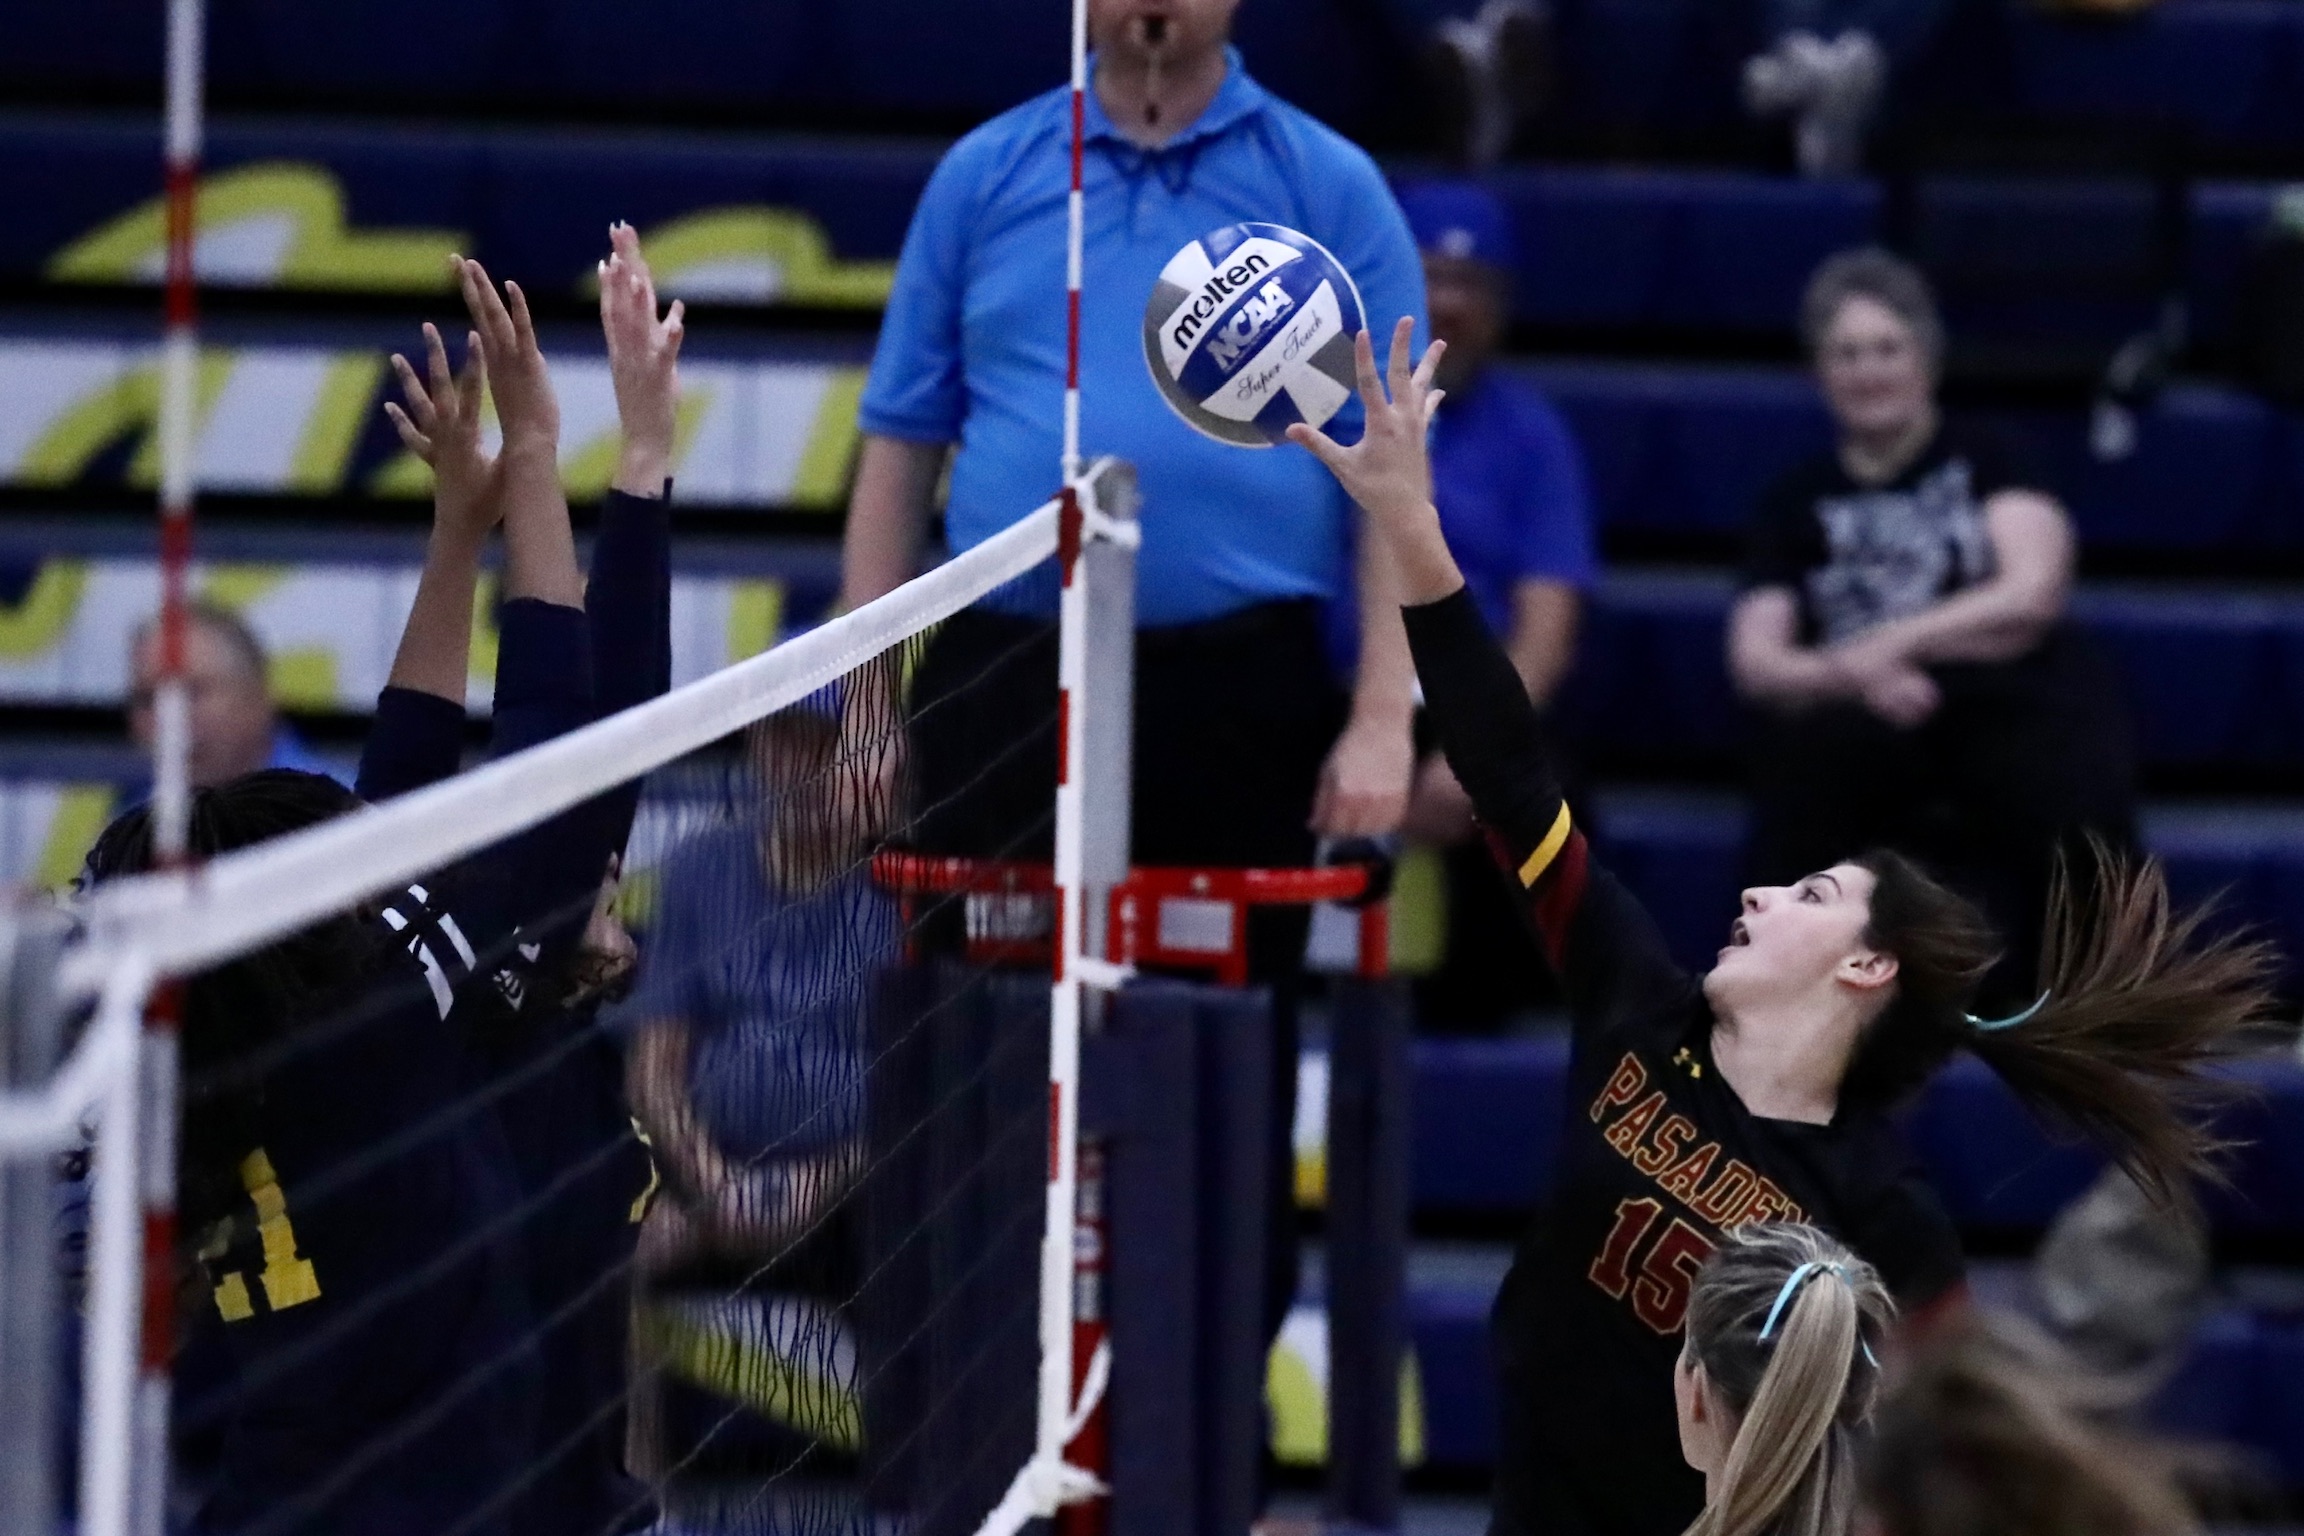 Reese Roper makes a play at the net during PCC's comeback win at Canyons Wednesday night (photo by Michael Watkins).